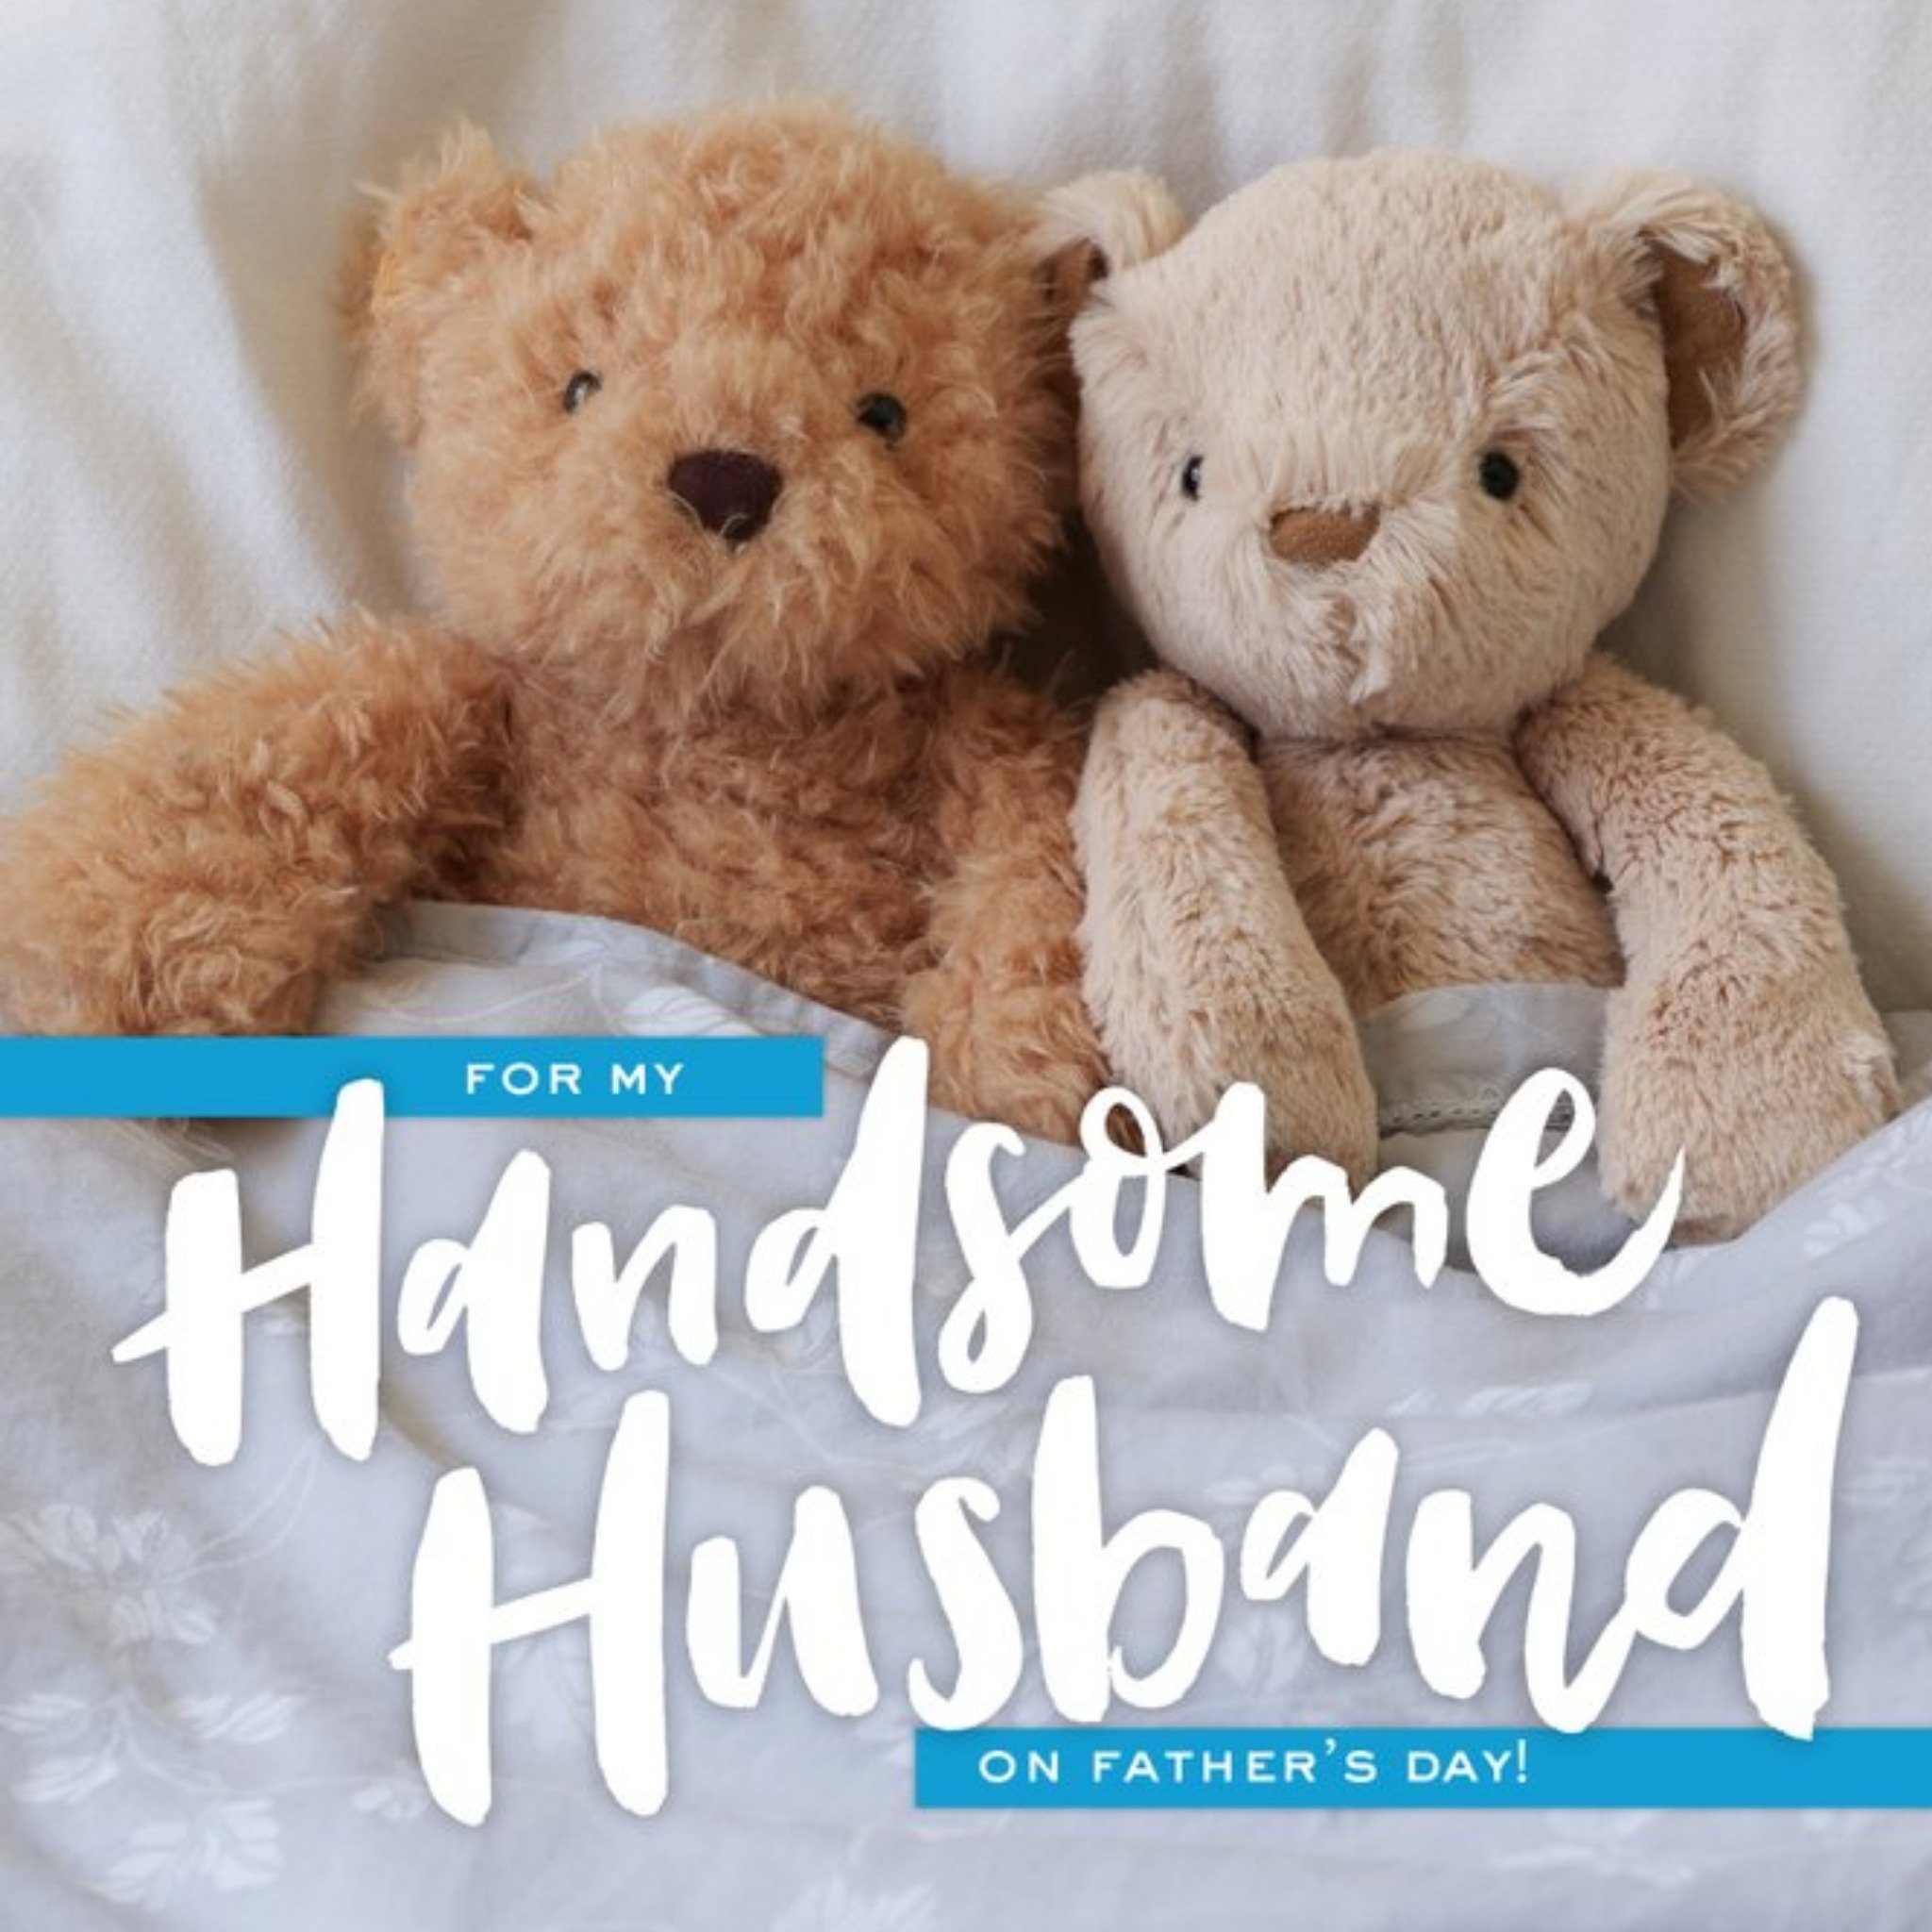 Moonpig Teddy Bears In Bed For My Husband Fathers Day Card, Square